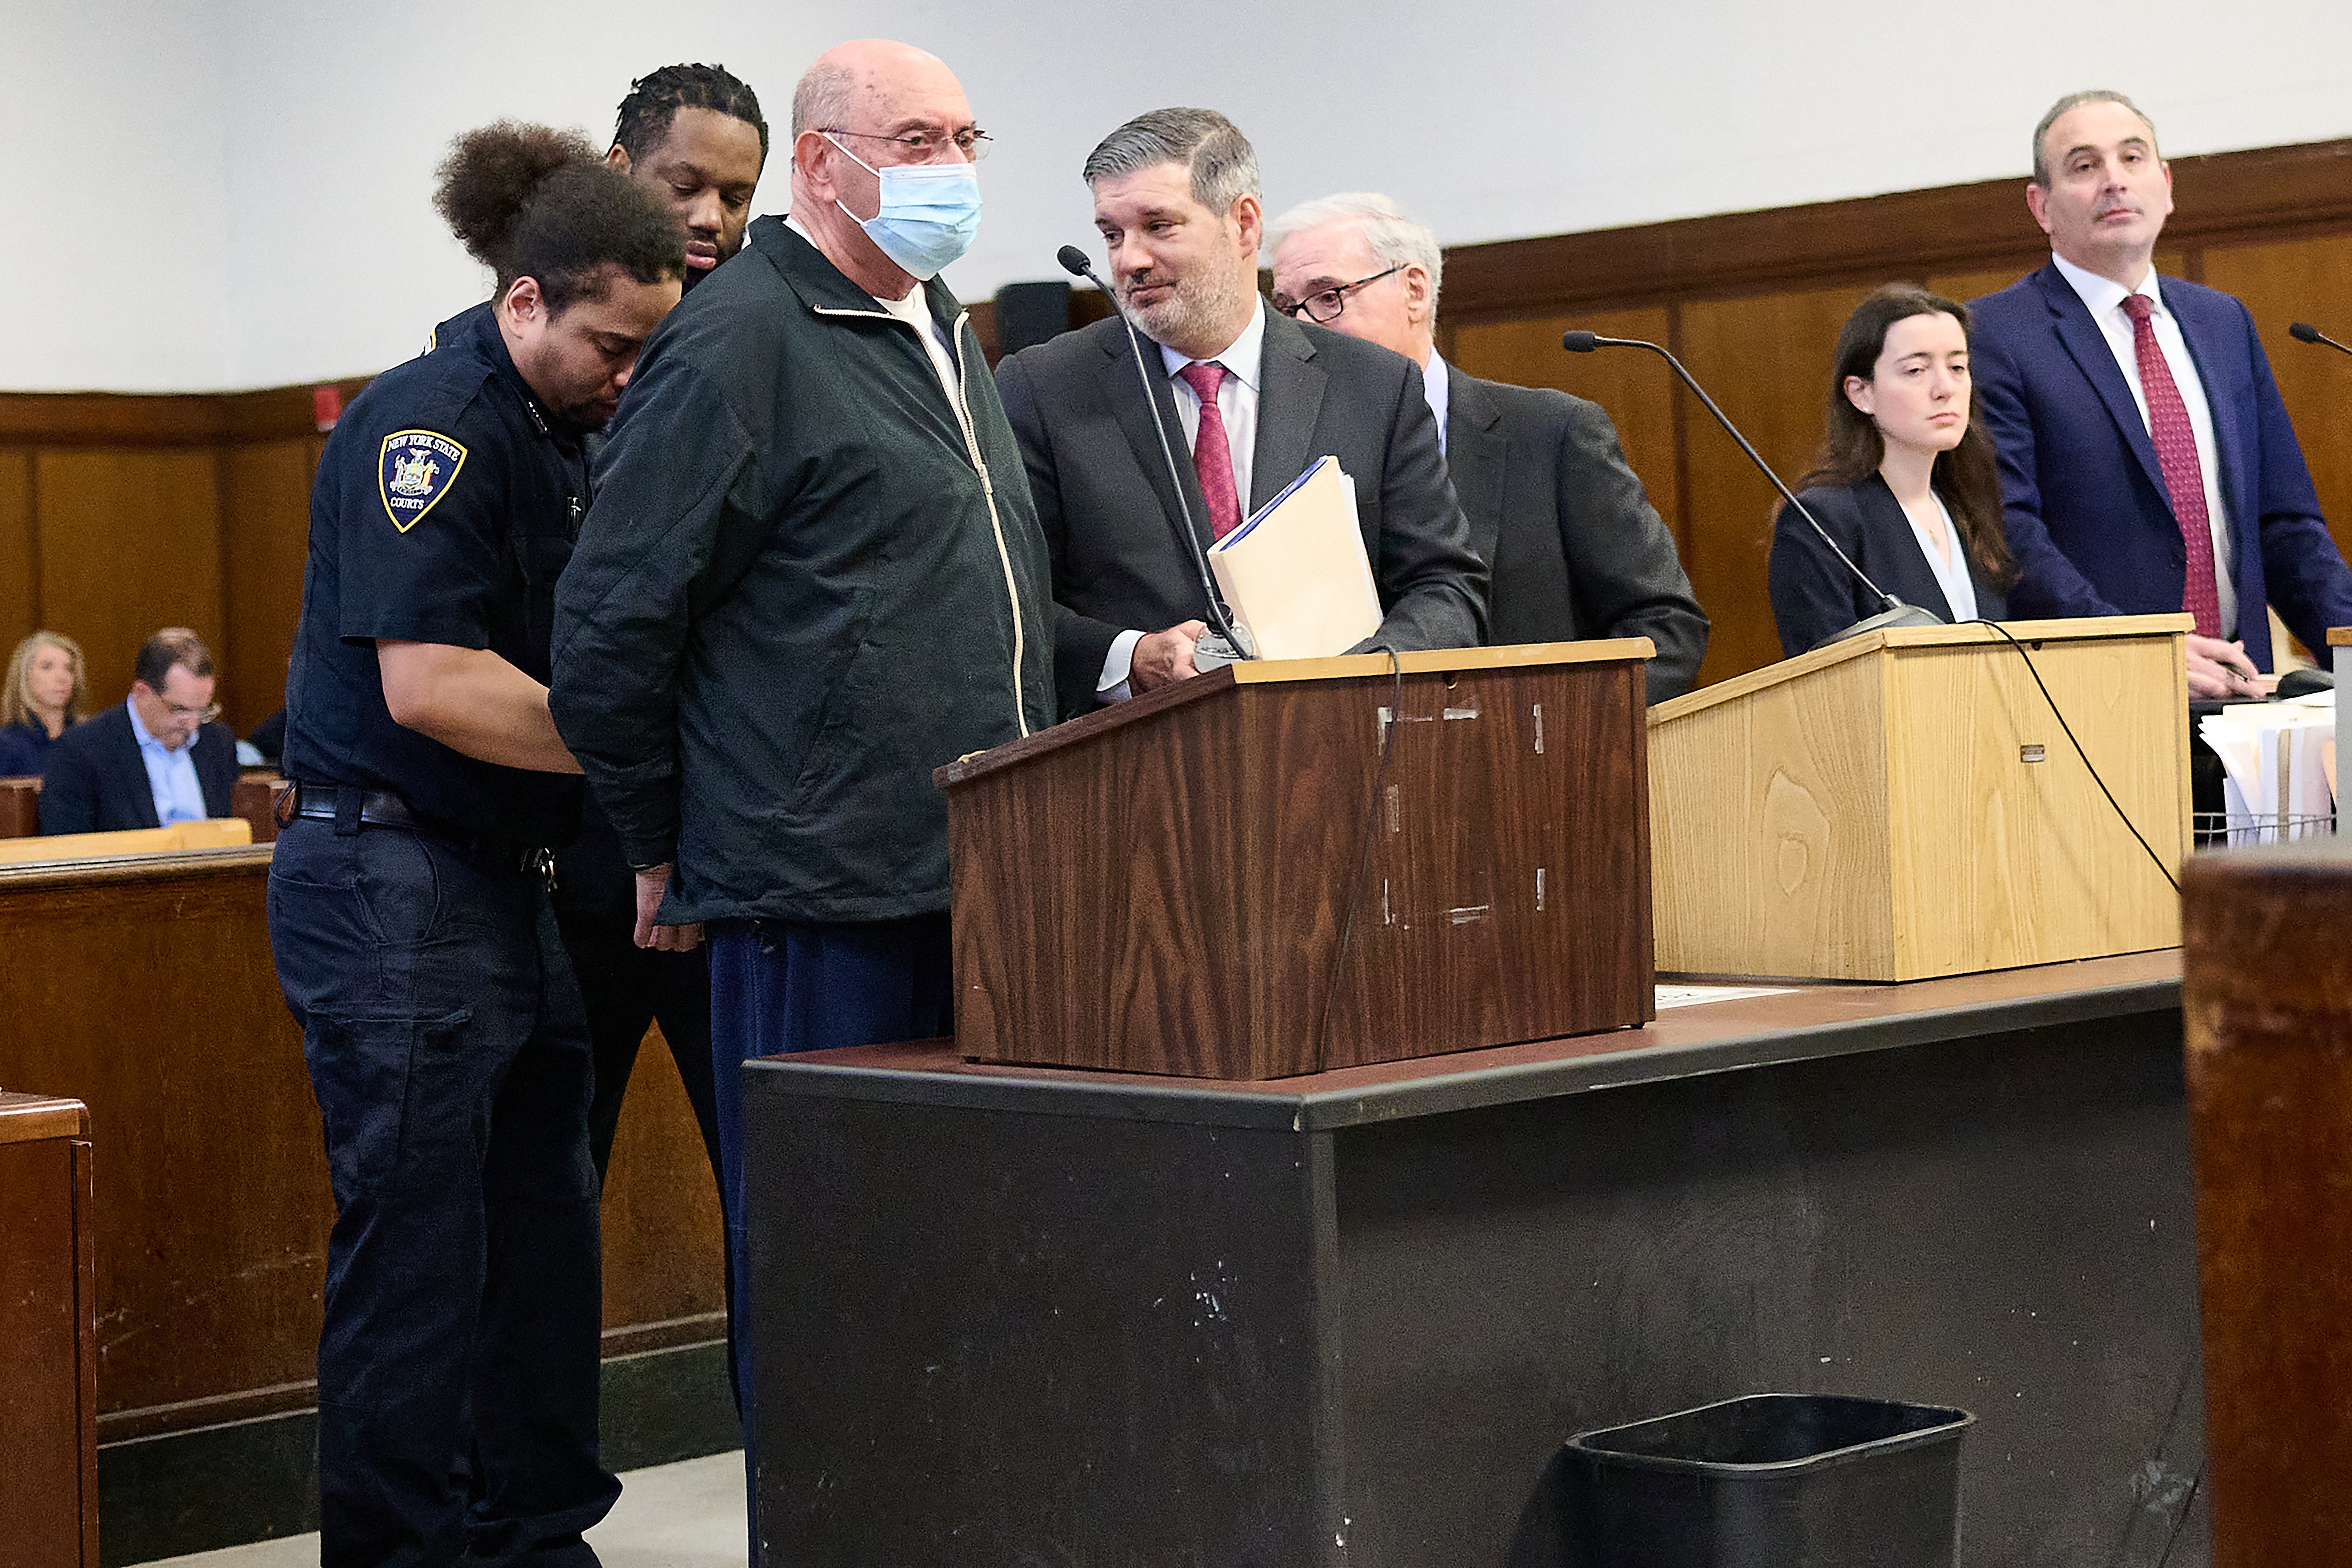 Allen Weisselberg is placed in handcuffs after his sentencing in a Manhattan criminal court on 10 April on perjury charges